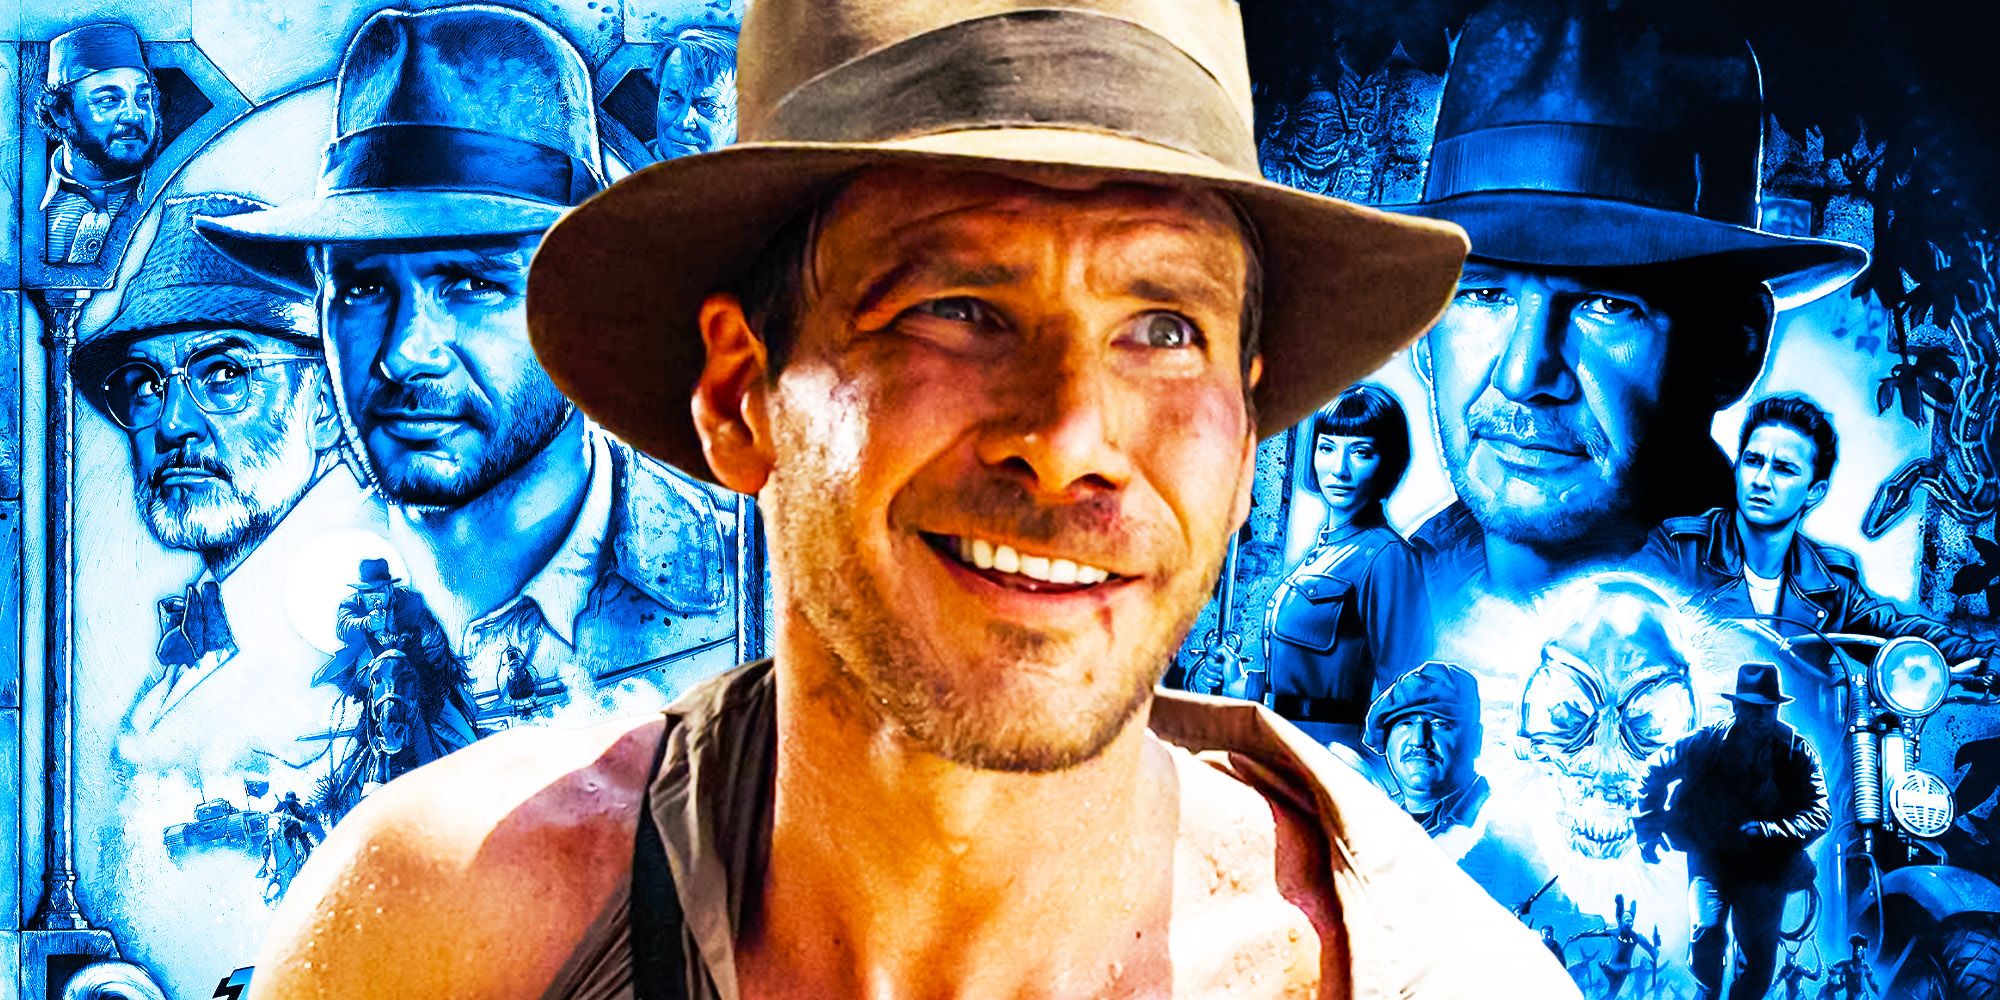 RELEASE DATE: May 22, 2008. MOVIE TITLE: Indiana Jones and the Kingdom of  the Crystal Skull. STUDIO: Paramount. PLOT: Famed archaeologist/adventurer  Dr. Henry 'Indiana' Jones is called back into action when he